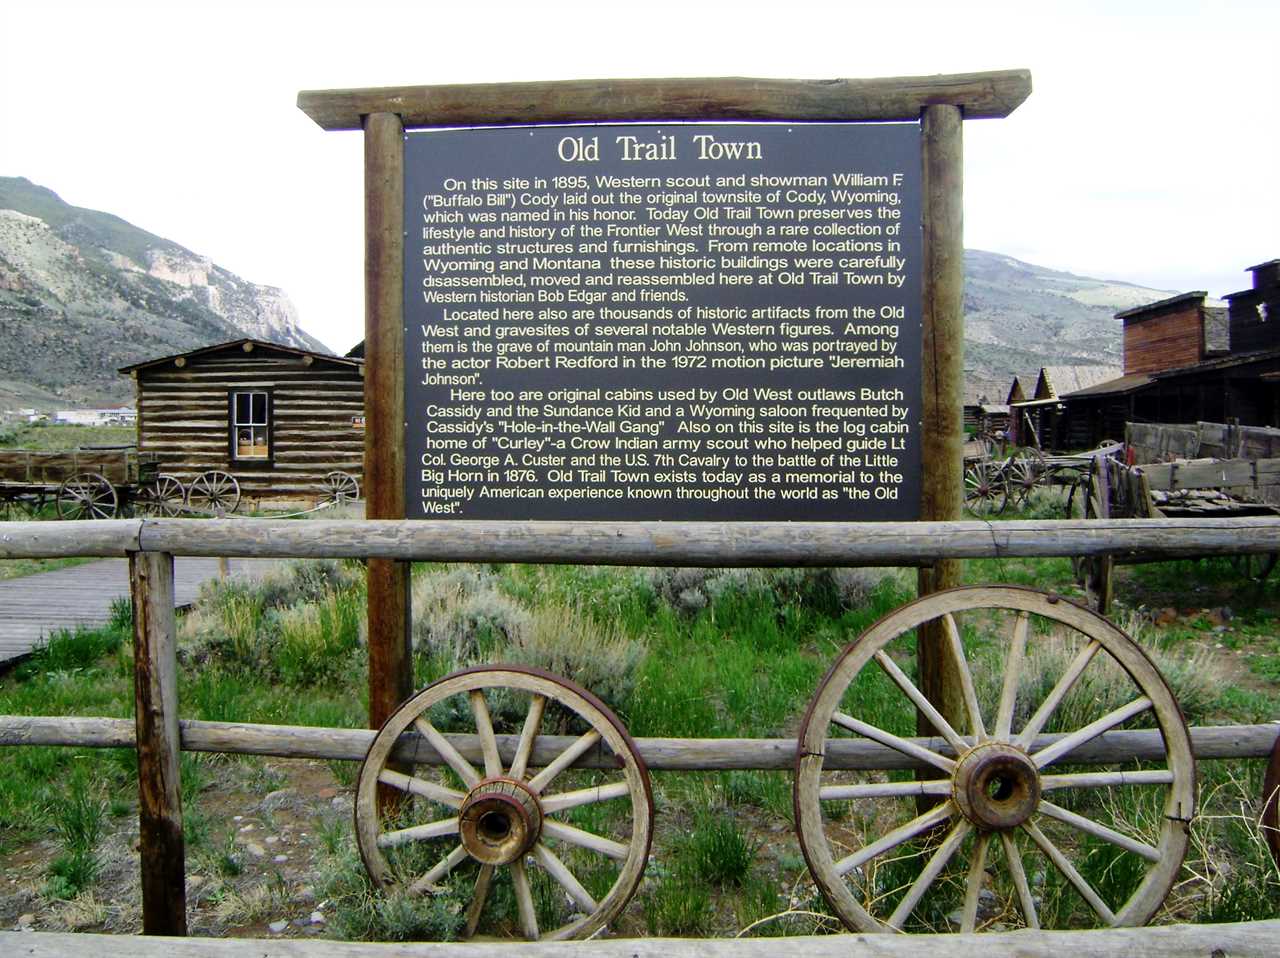 Sign with the heading "Old Trail Town" with Old West buildings in the background.